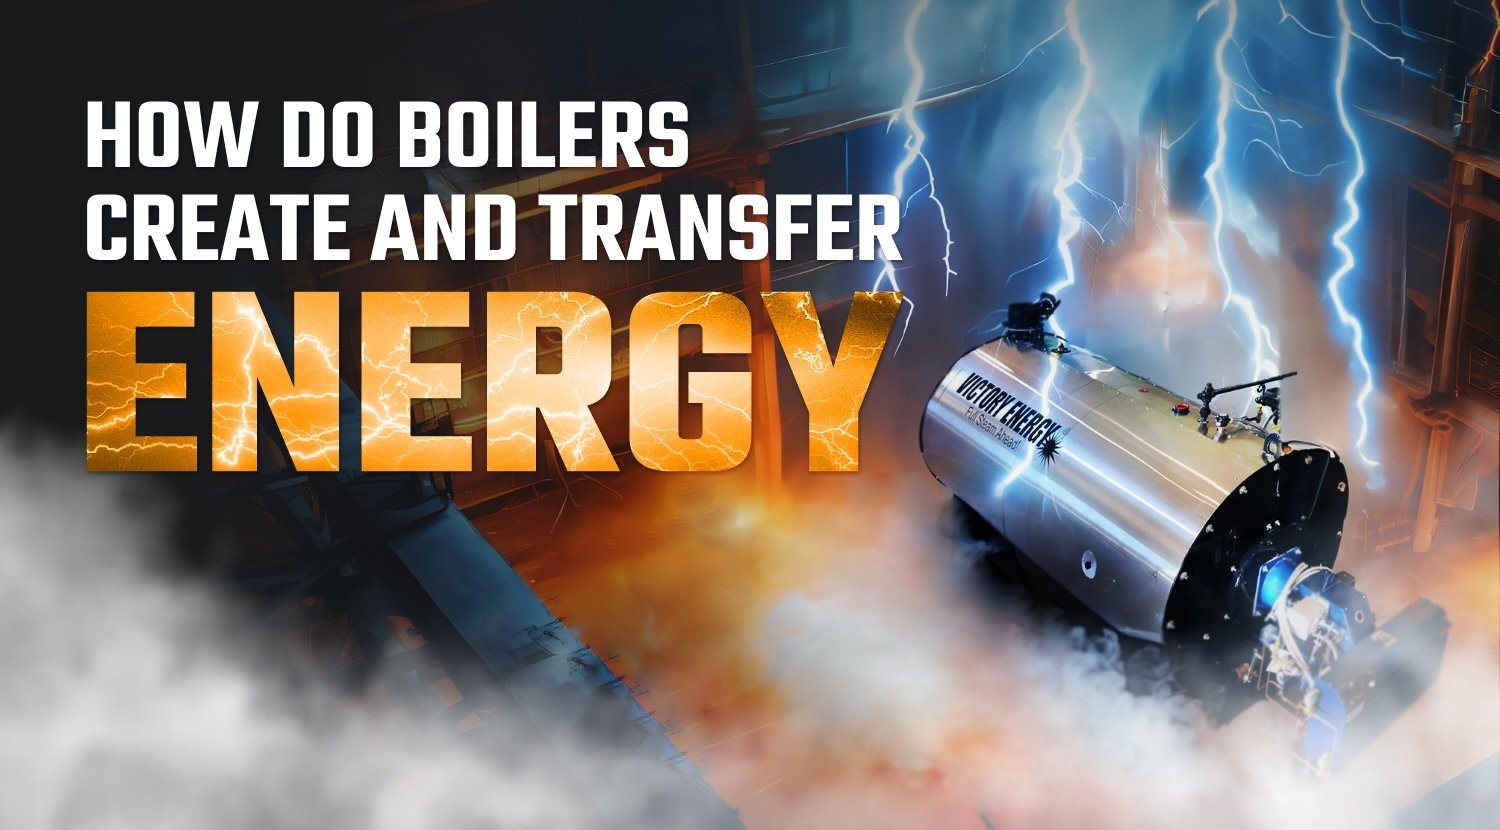 How Do Boilers Create and Transfer Energy?